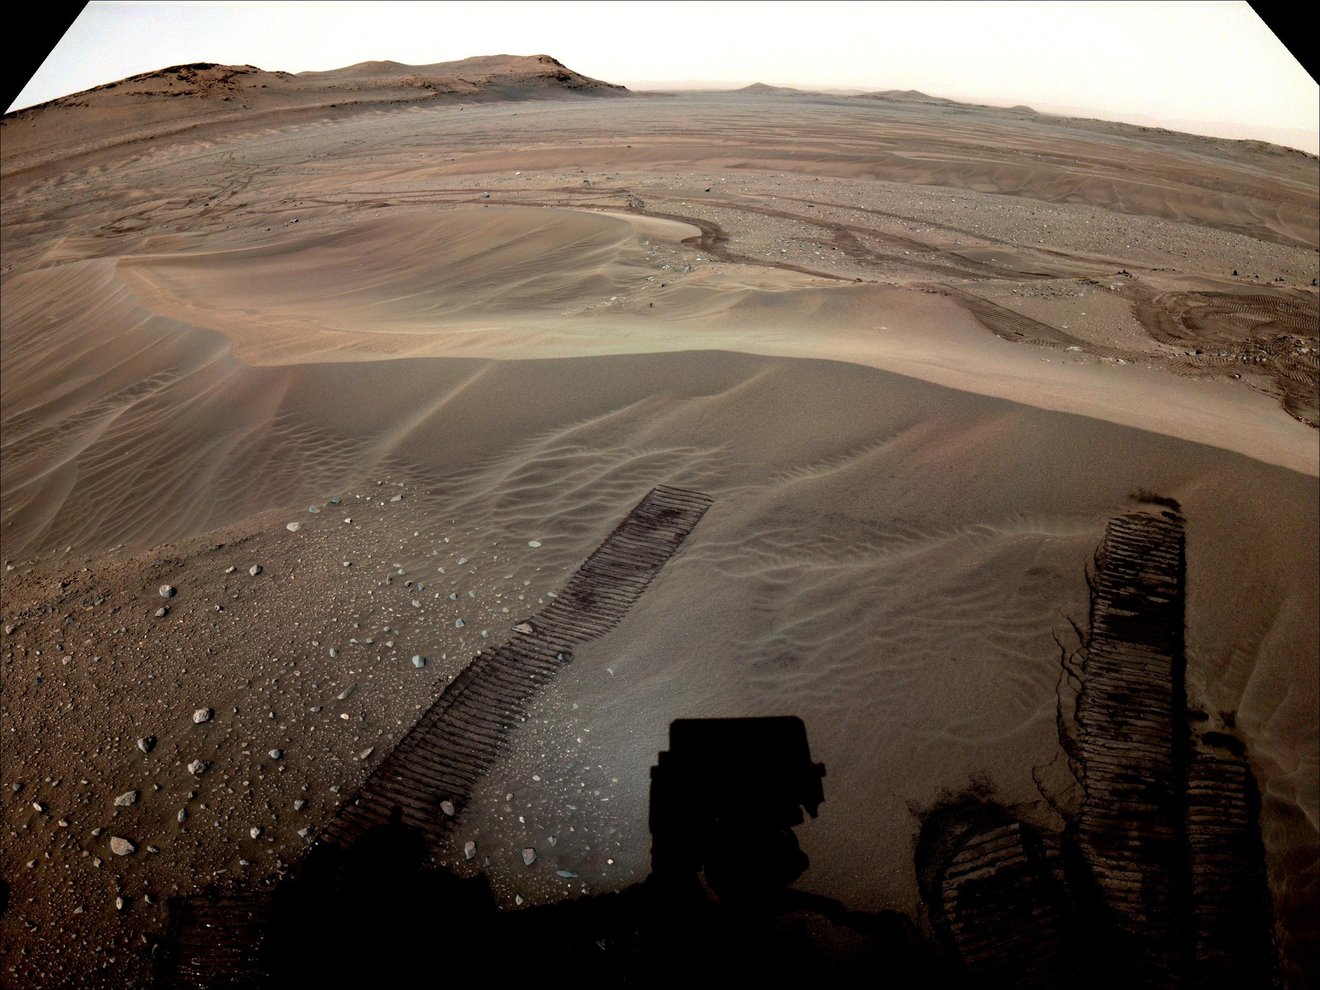 Perseverance is Putting its Samples Onto the Surface of Mars, So a Future Helico..